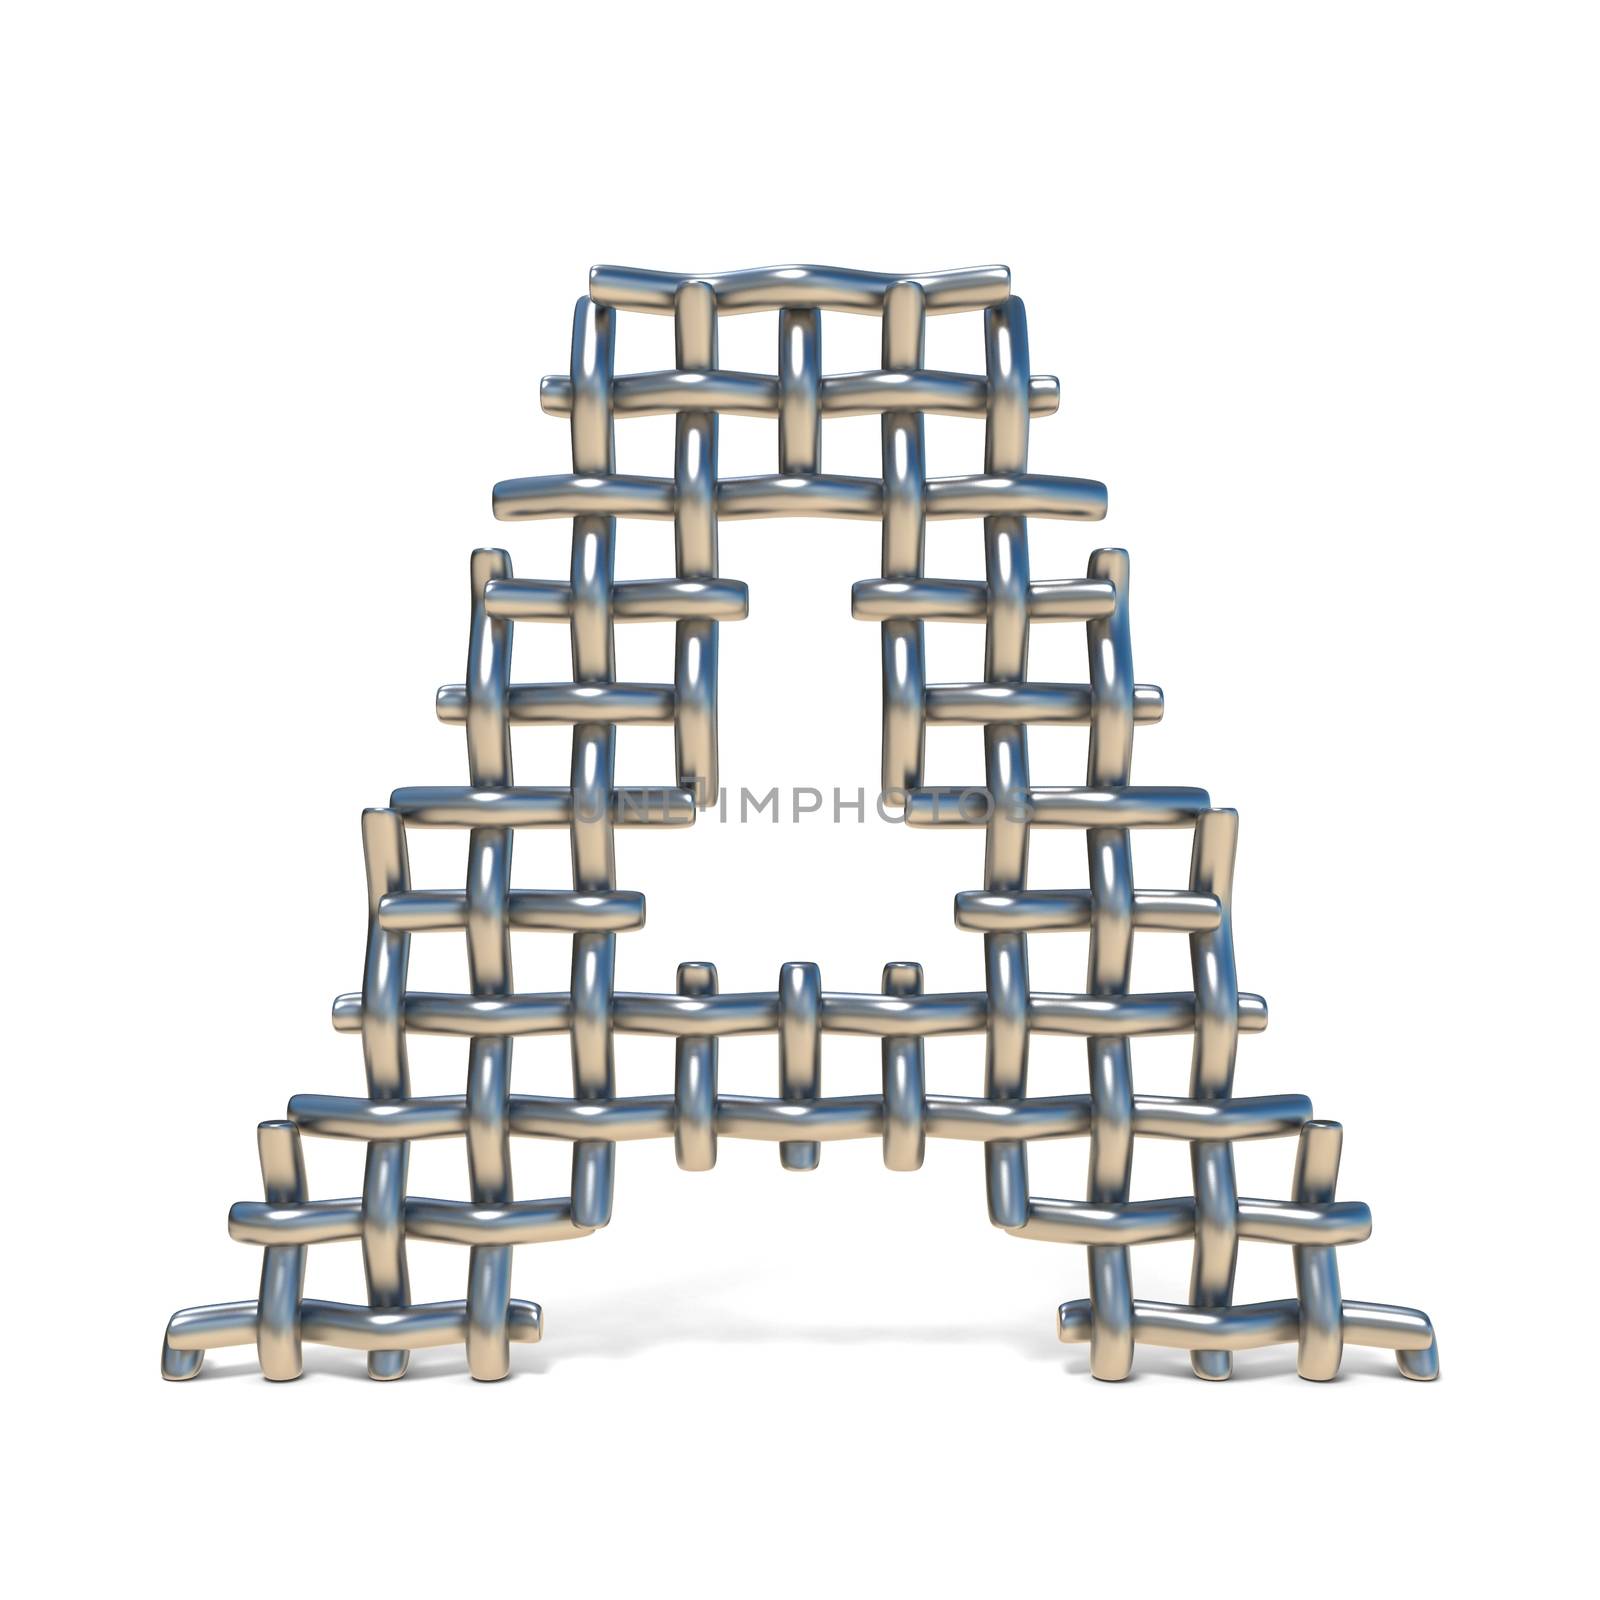 Metal wire mesh font LETTER A 3D render illustration isolated on white background